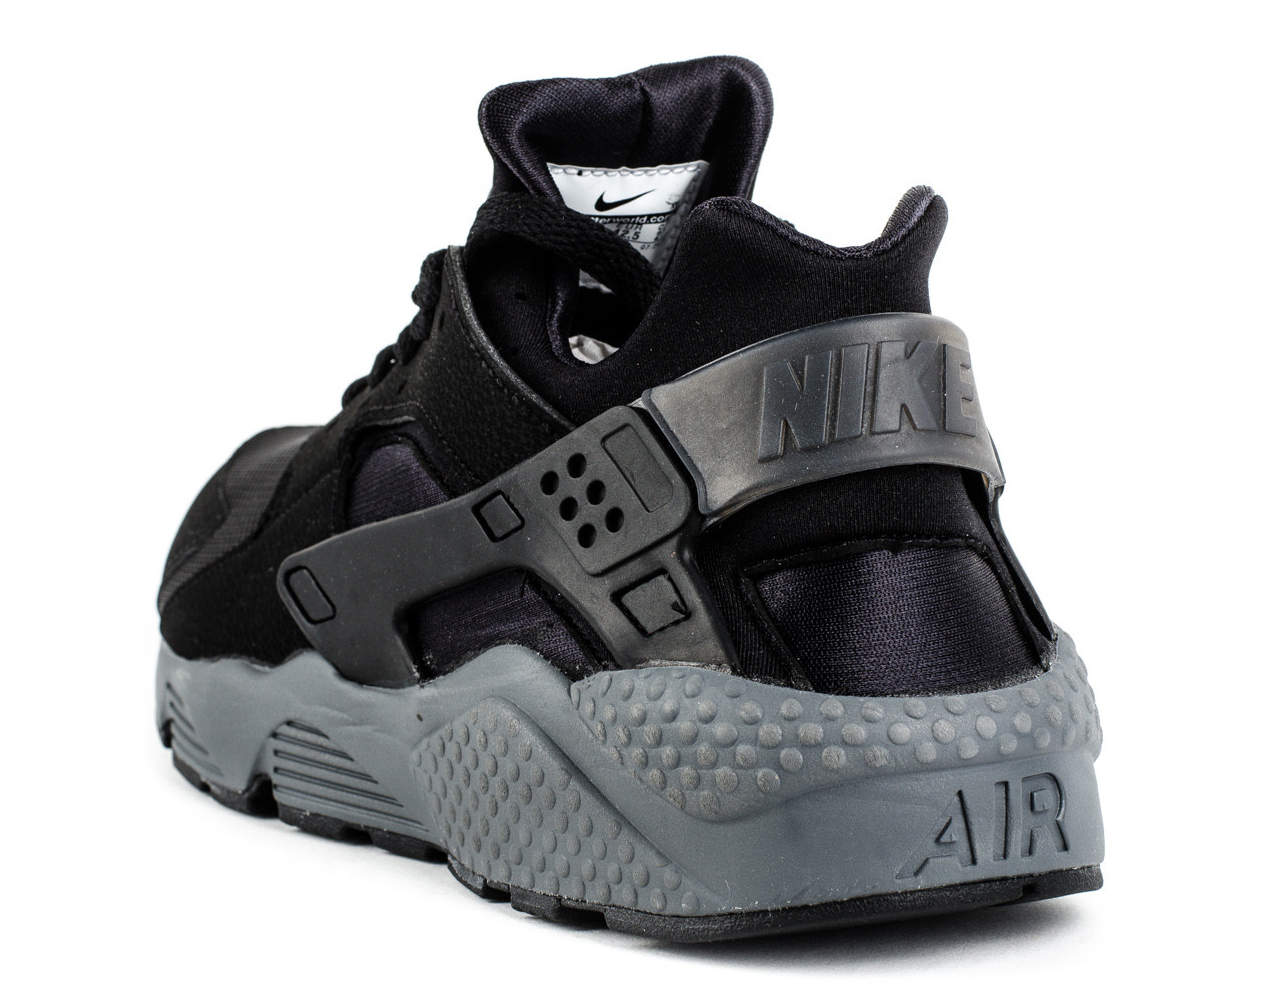 palm Aan boord formeel Nike Air Huaraches in Black and Grey | Sole Collector